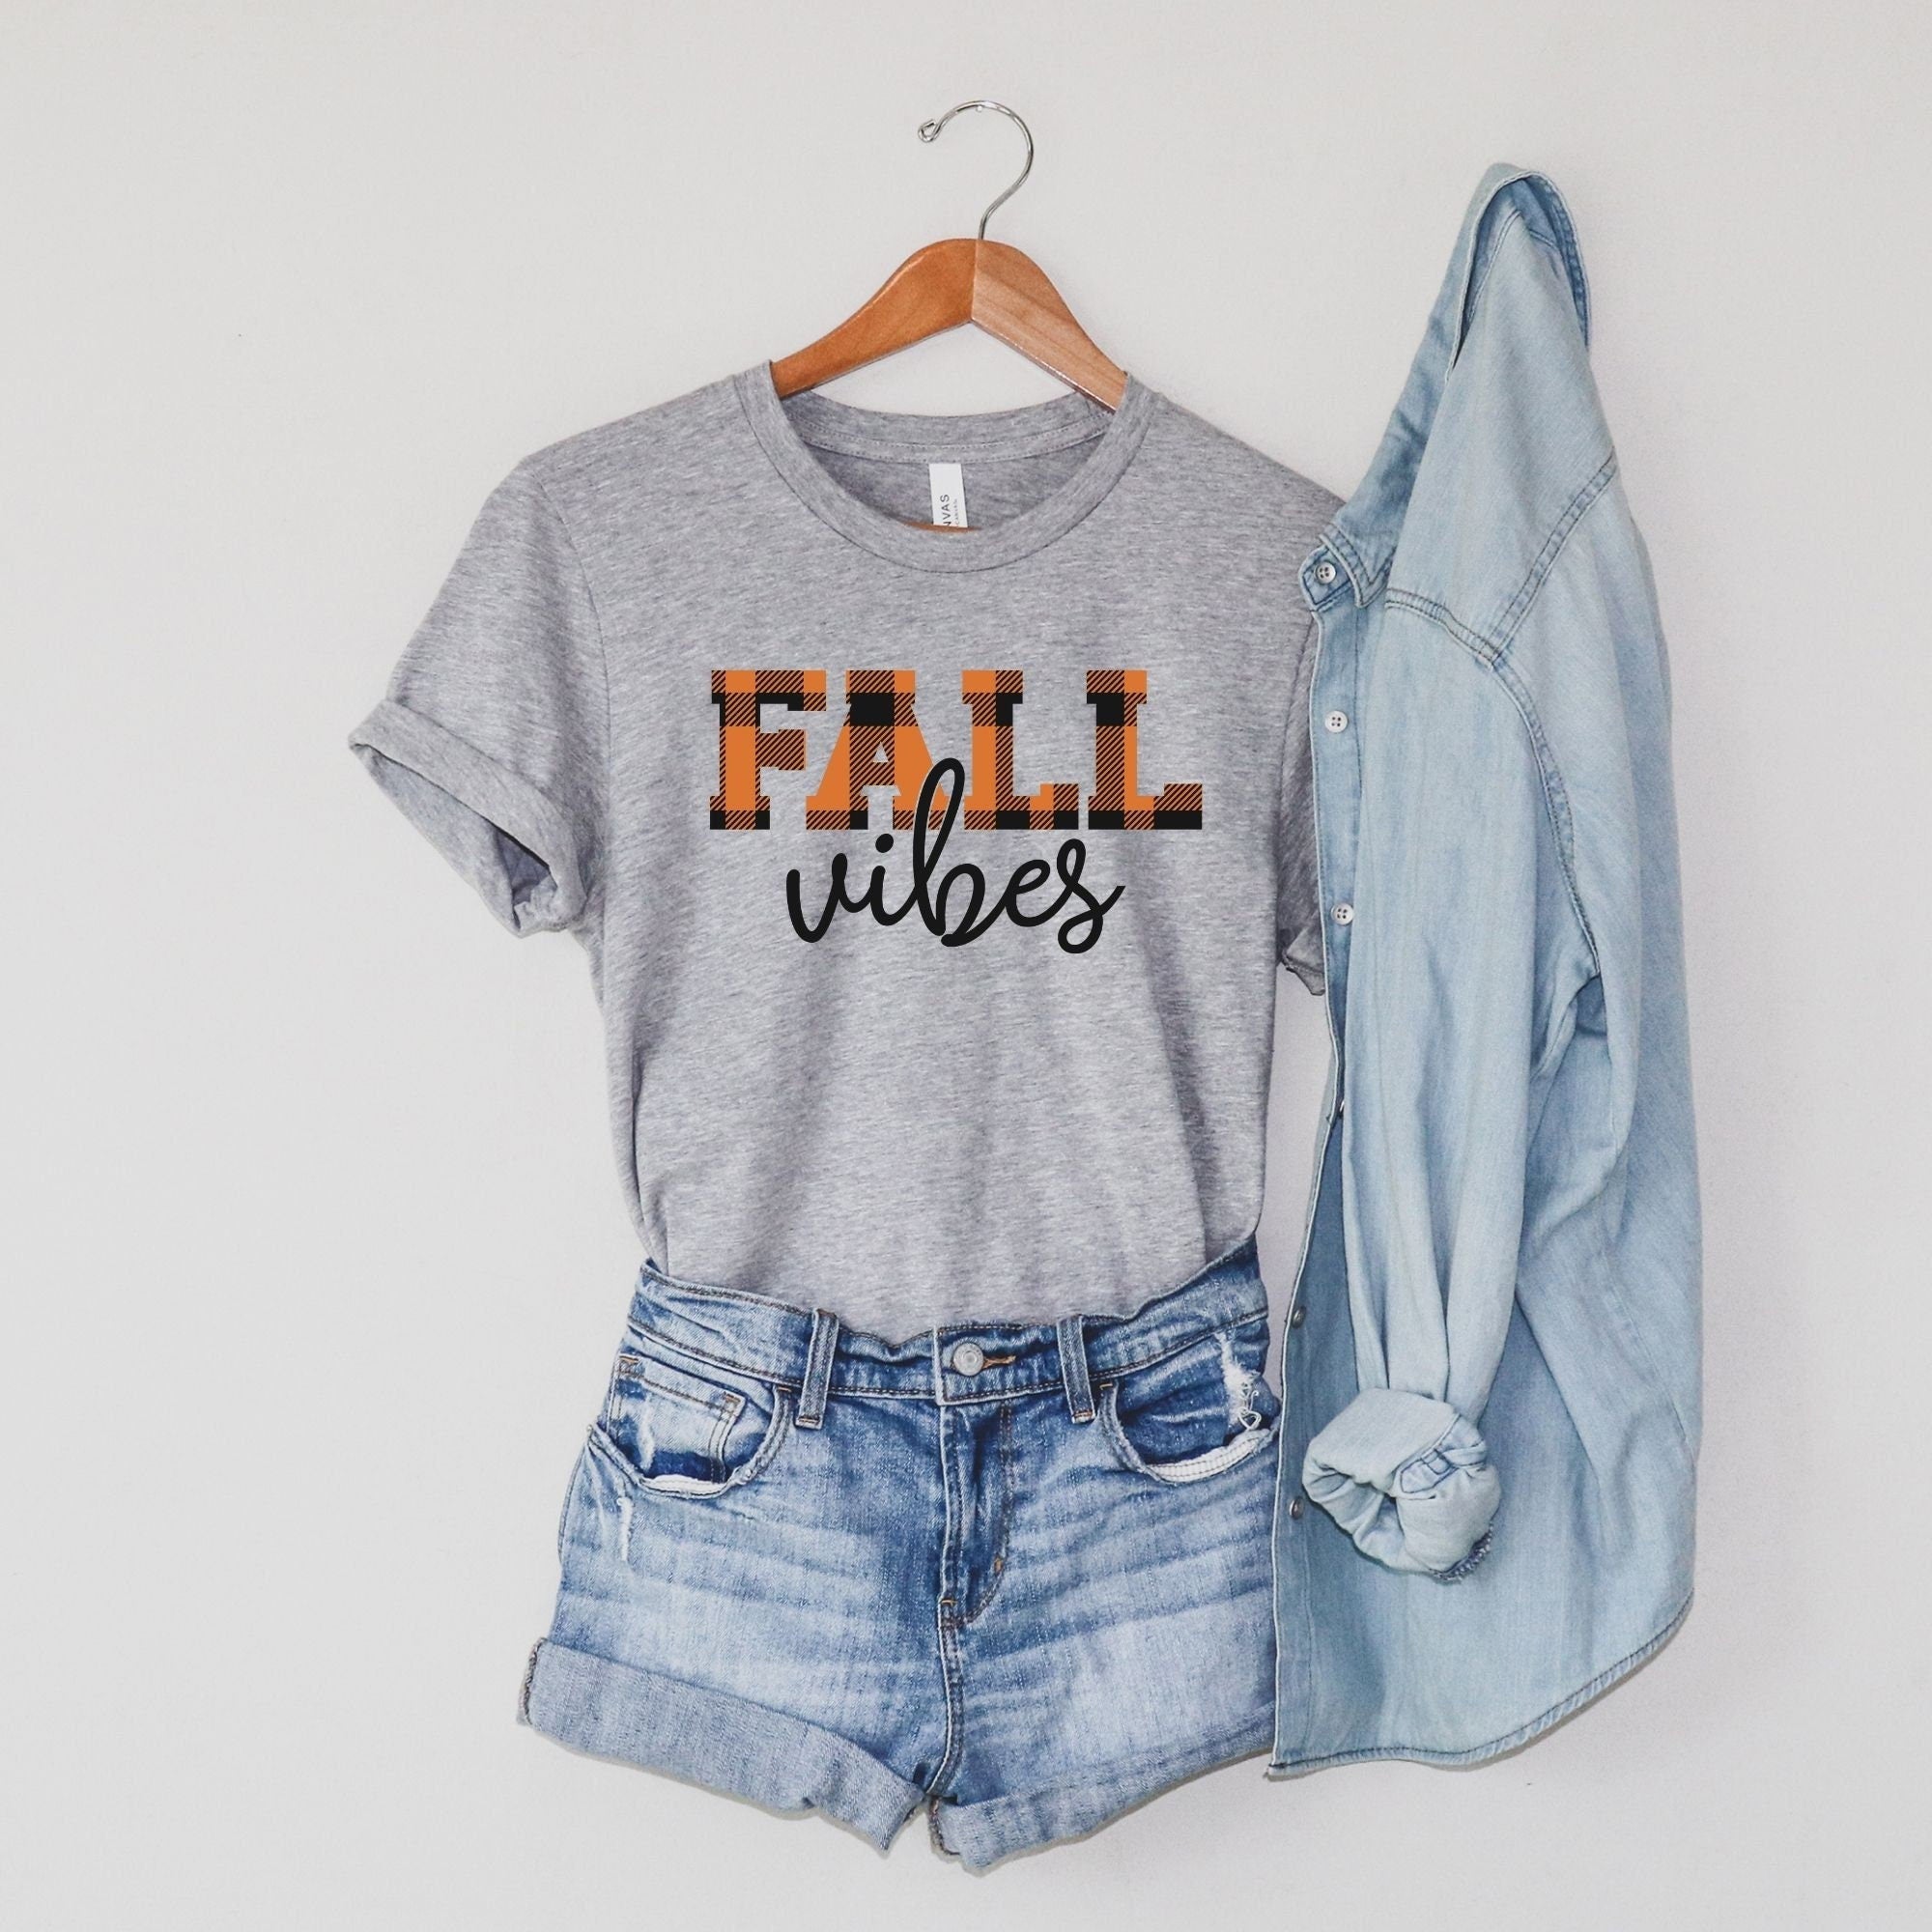 Fall Vibes Graphic Tee for Women *UNISEX FIT*-208 Tees Wholesale, Idaho